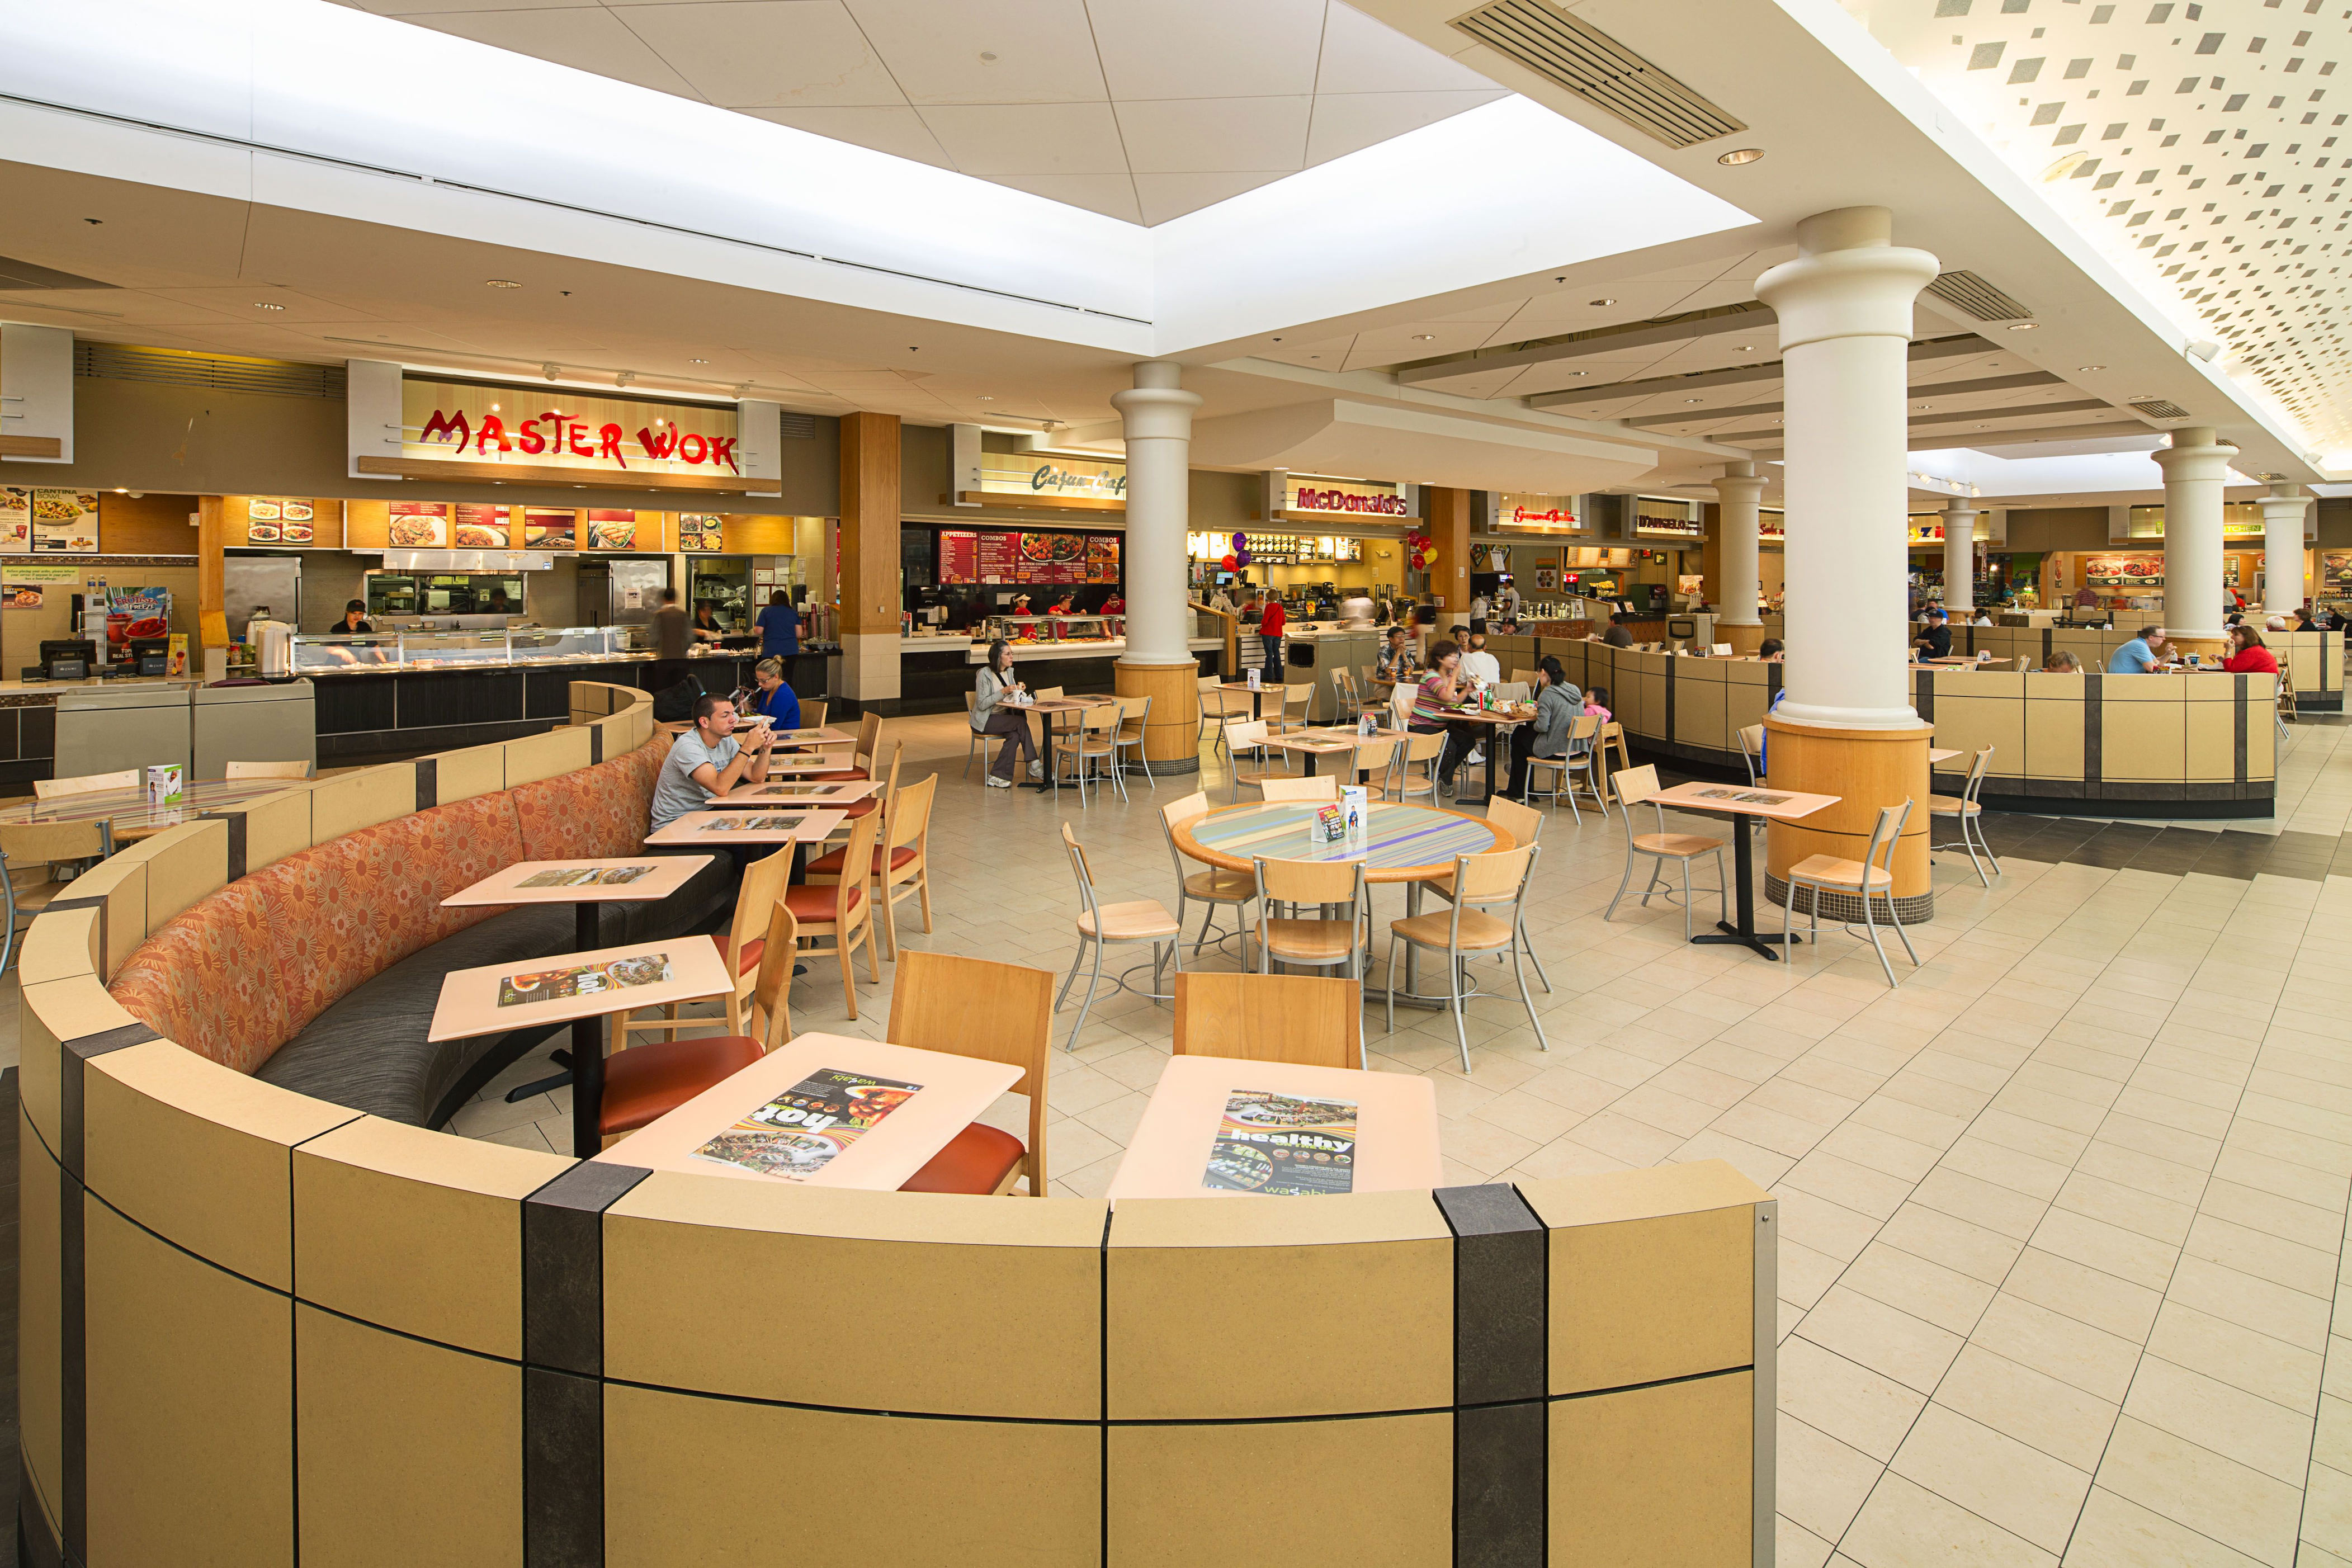 We Ranked the Best Mall Court Food Chains